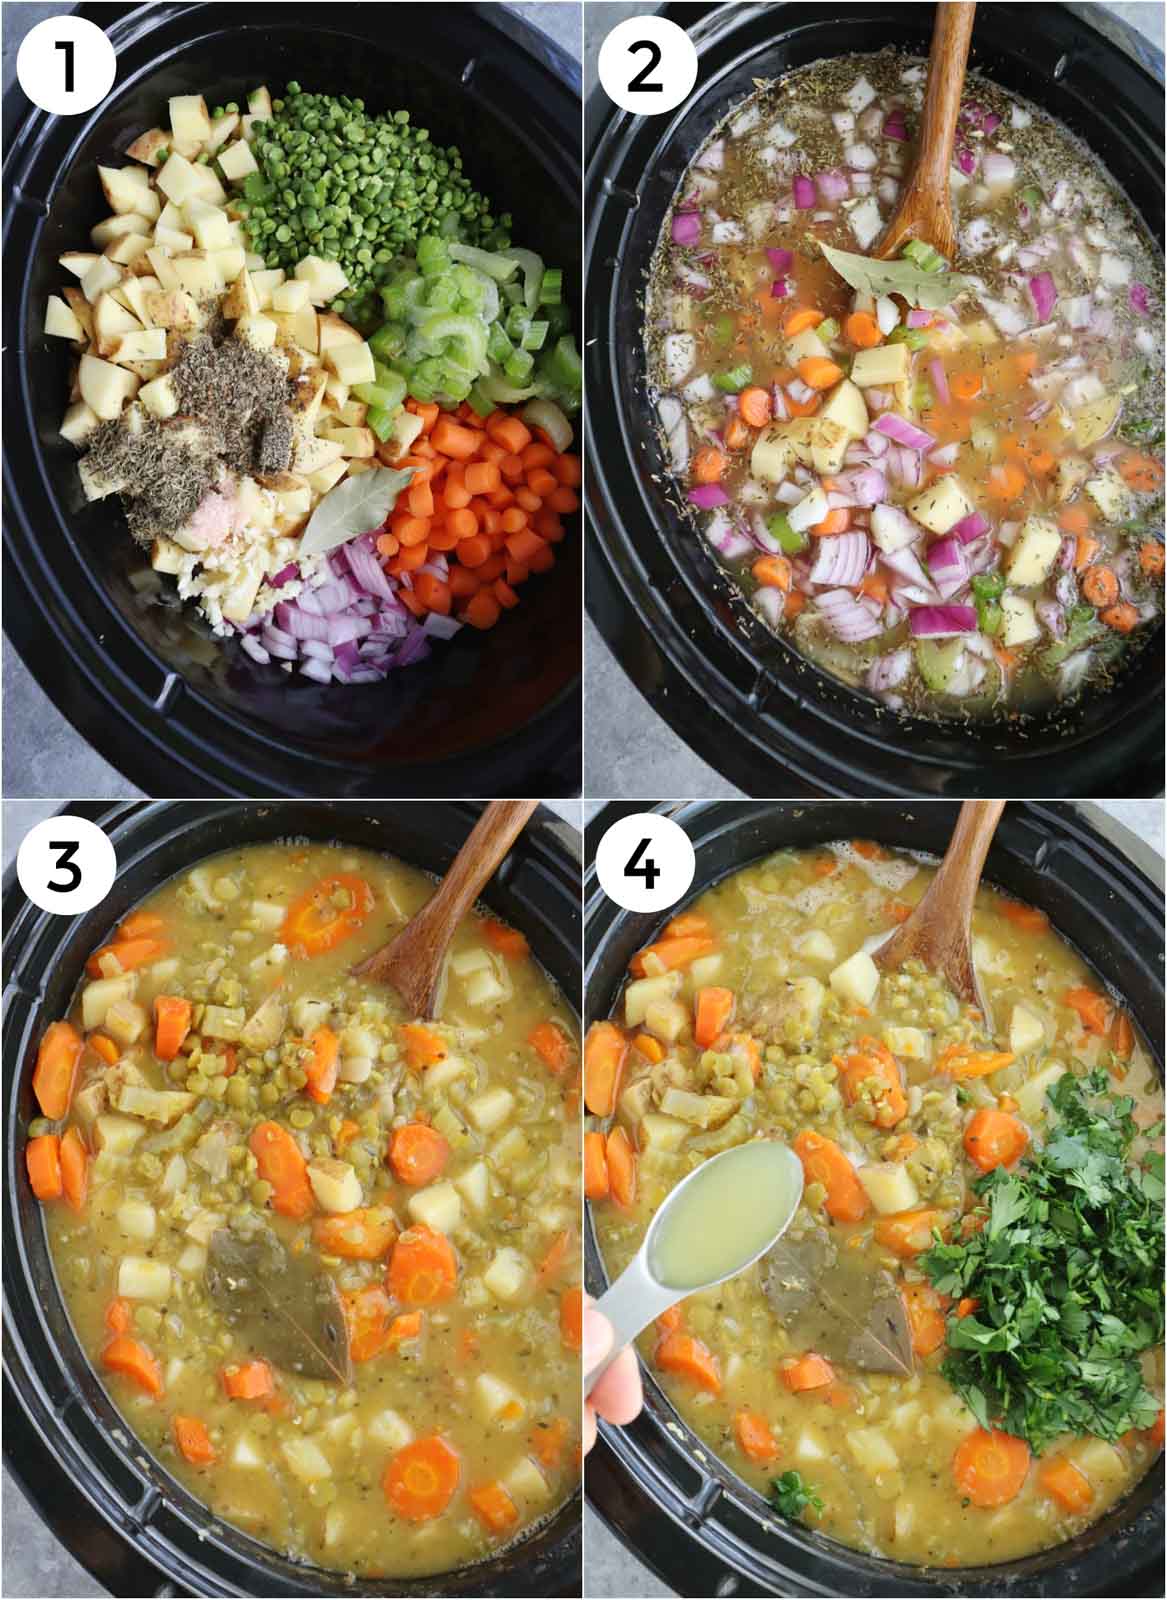 A photo collage showing how to make the recipe in the slow cooker step by step.